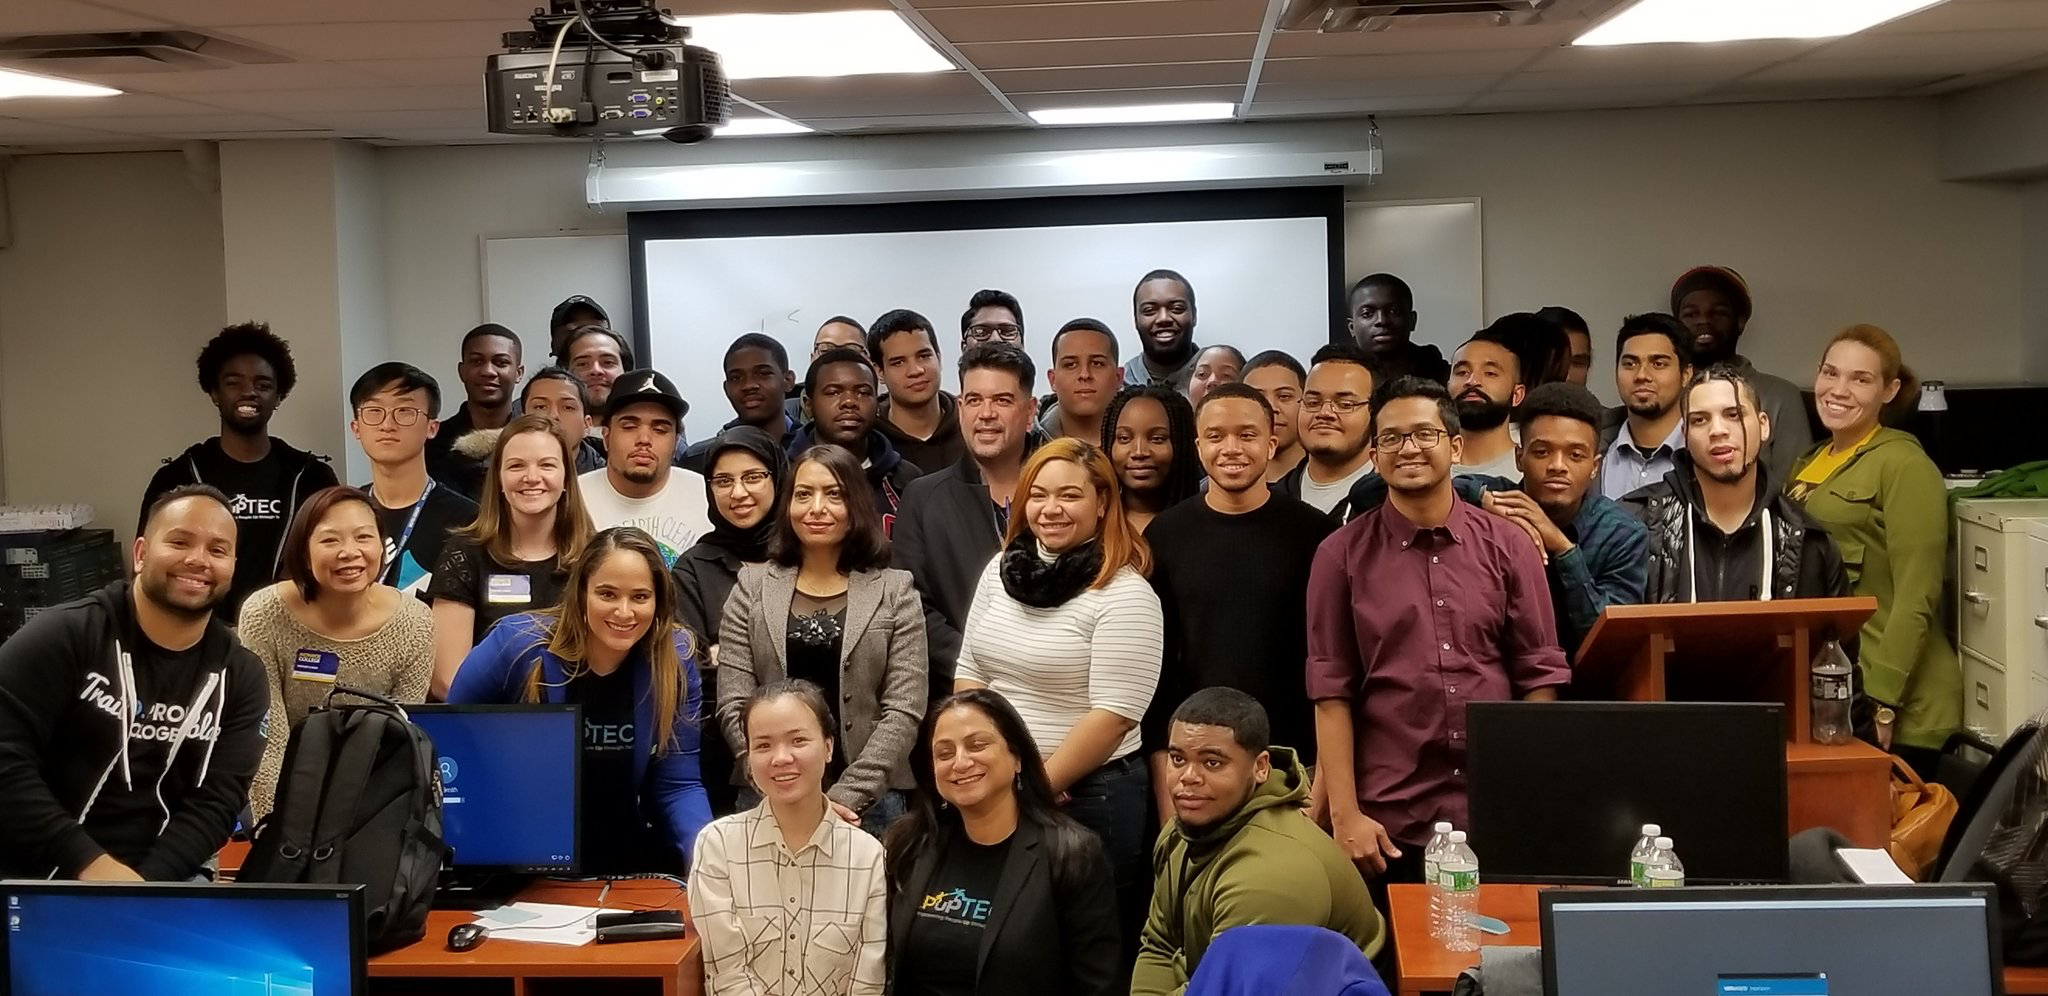  PepUp Tech Boot Camp, Monroe College, New York. NiM’s Shakil Kamran (front Row Left) and Saray Rosales (front row third from left, in Blue) are PepUp Tech Alumni, who volunteered at the recent PepUp Tech Bootcamp. 